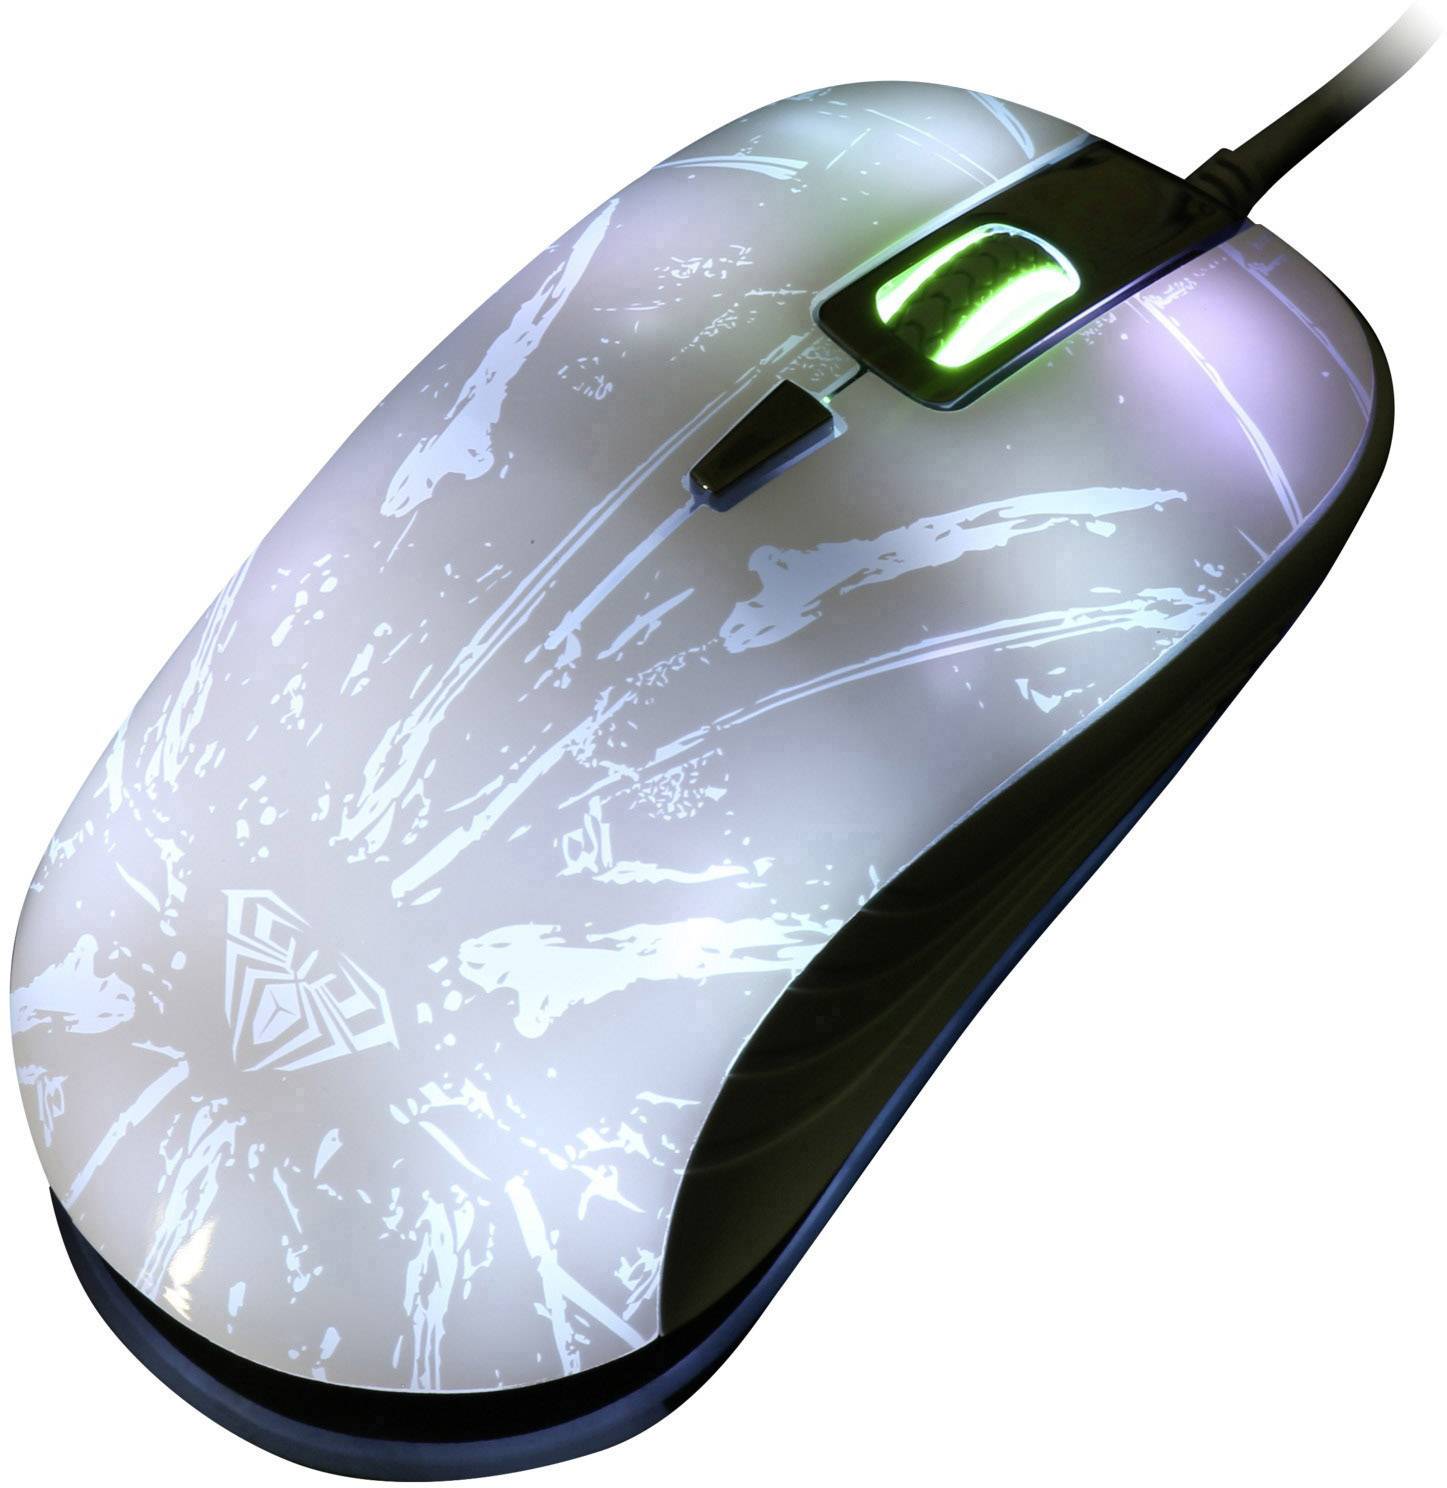 aula mouse how to change color